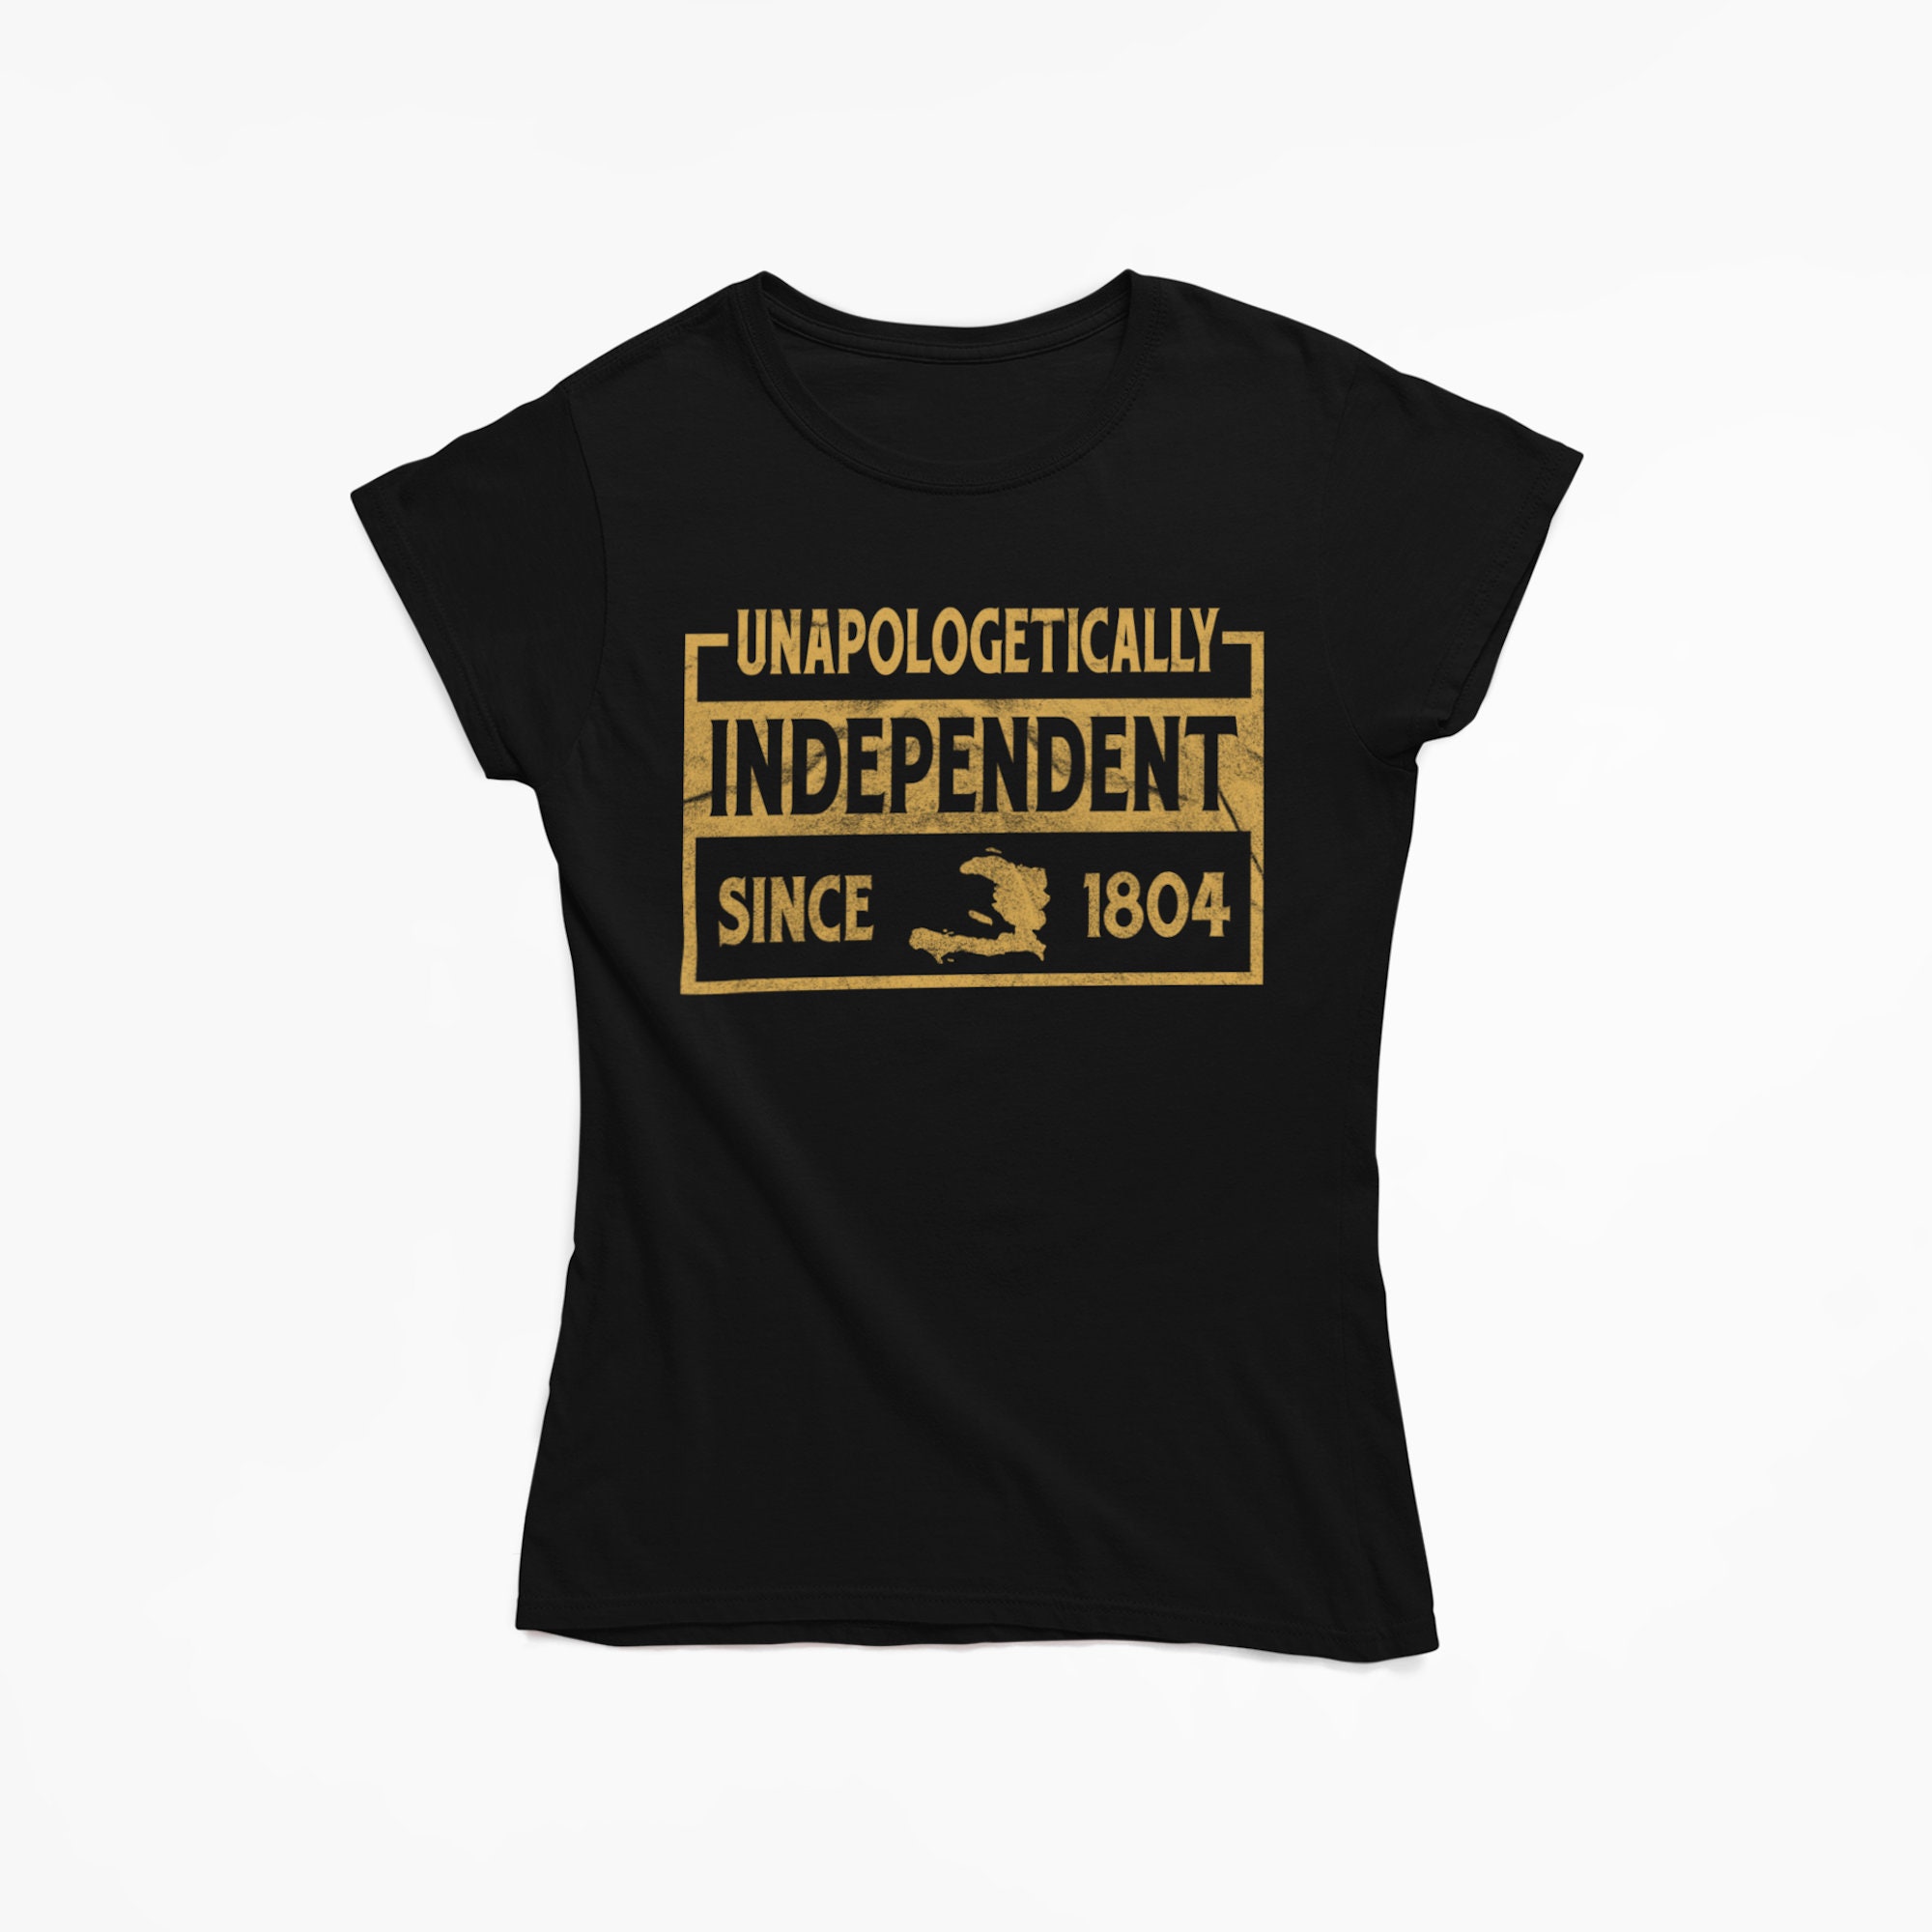 Discover Unapologetically Independent T-Shirt